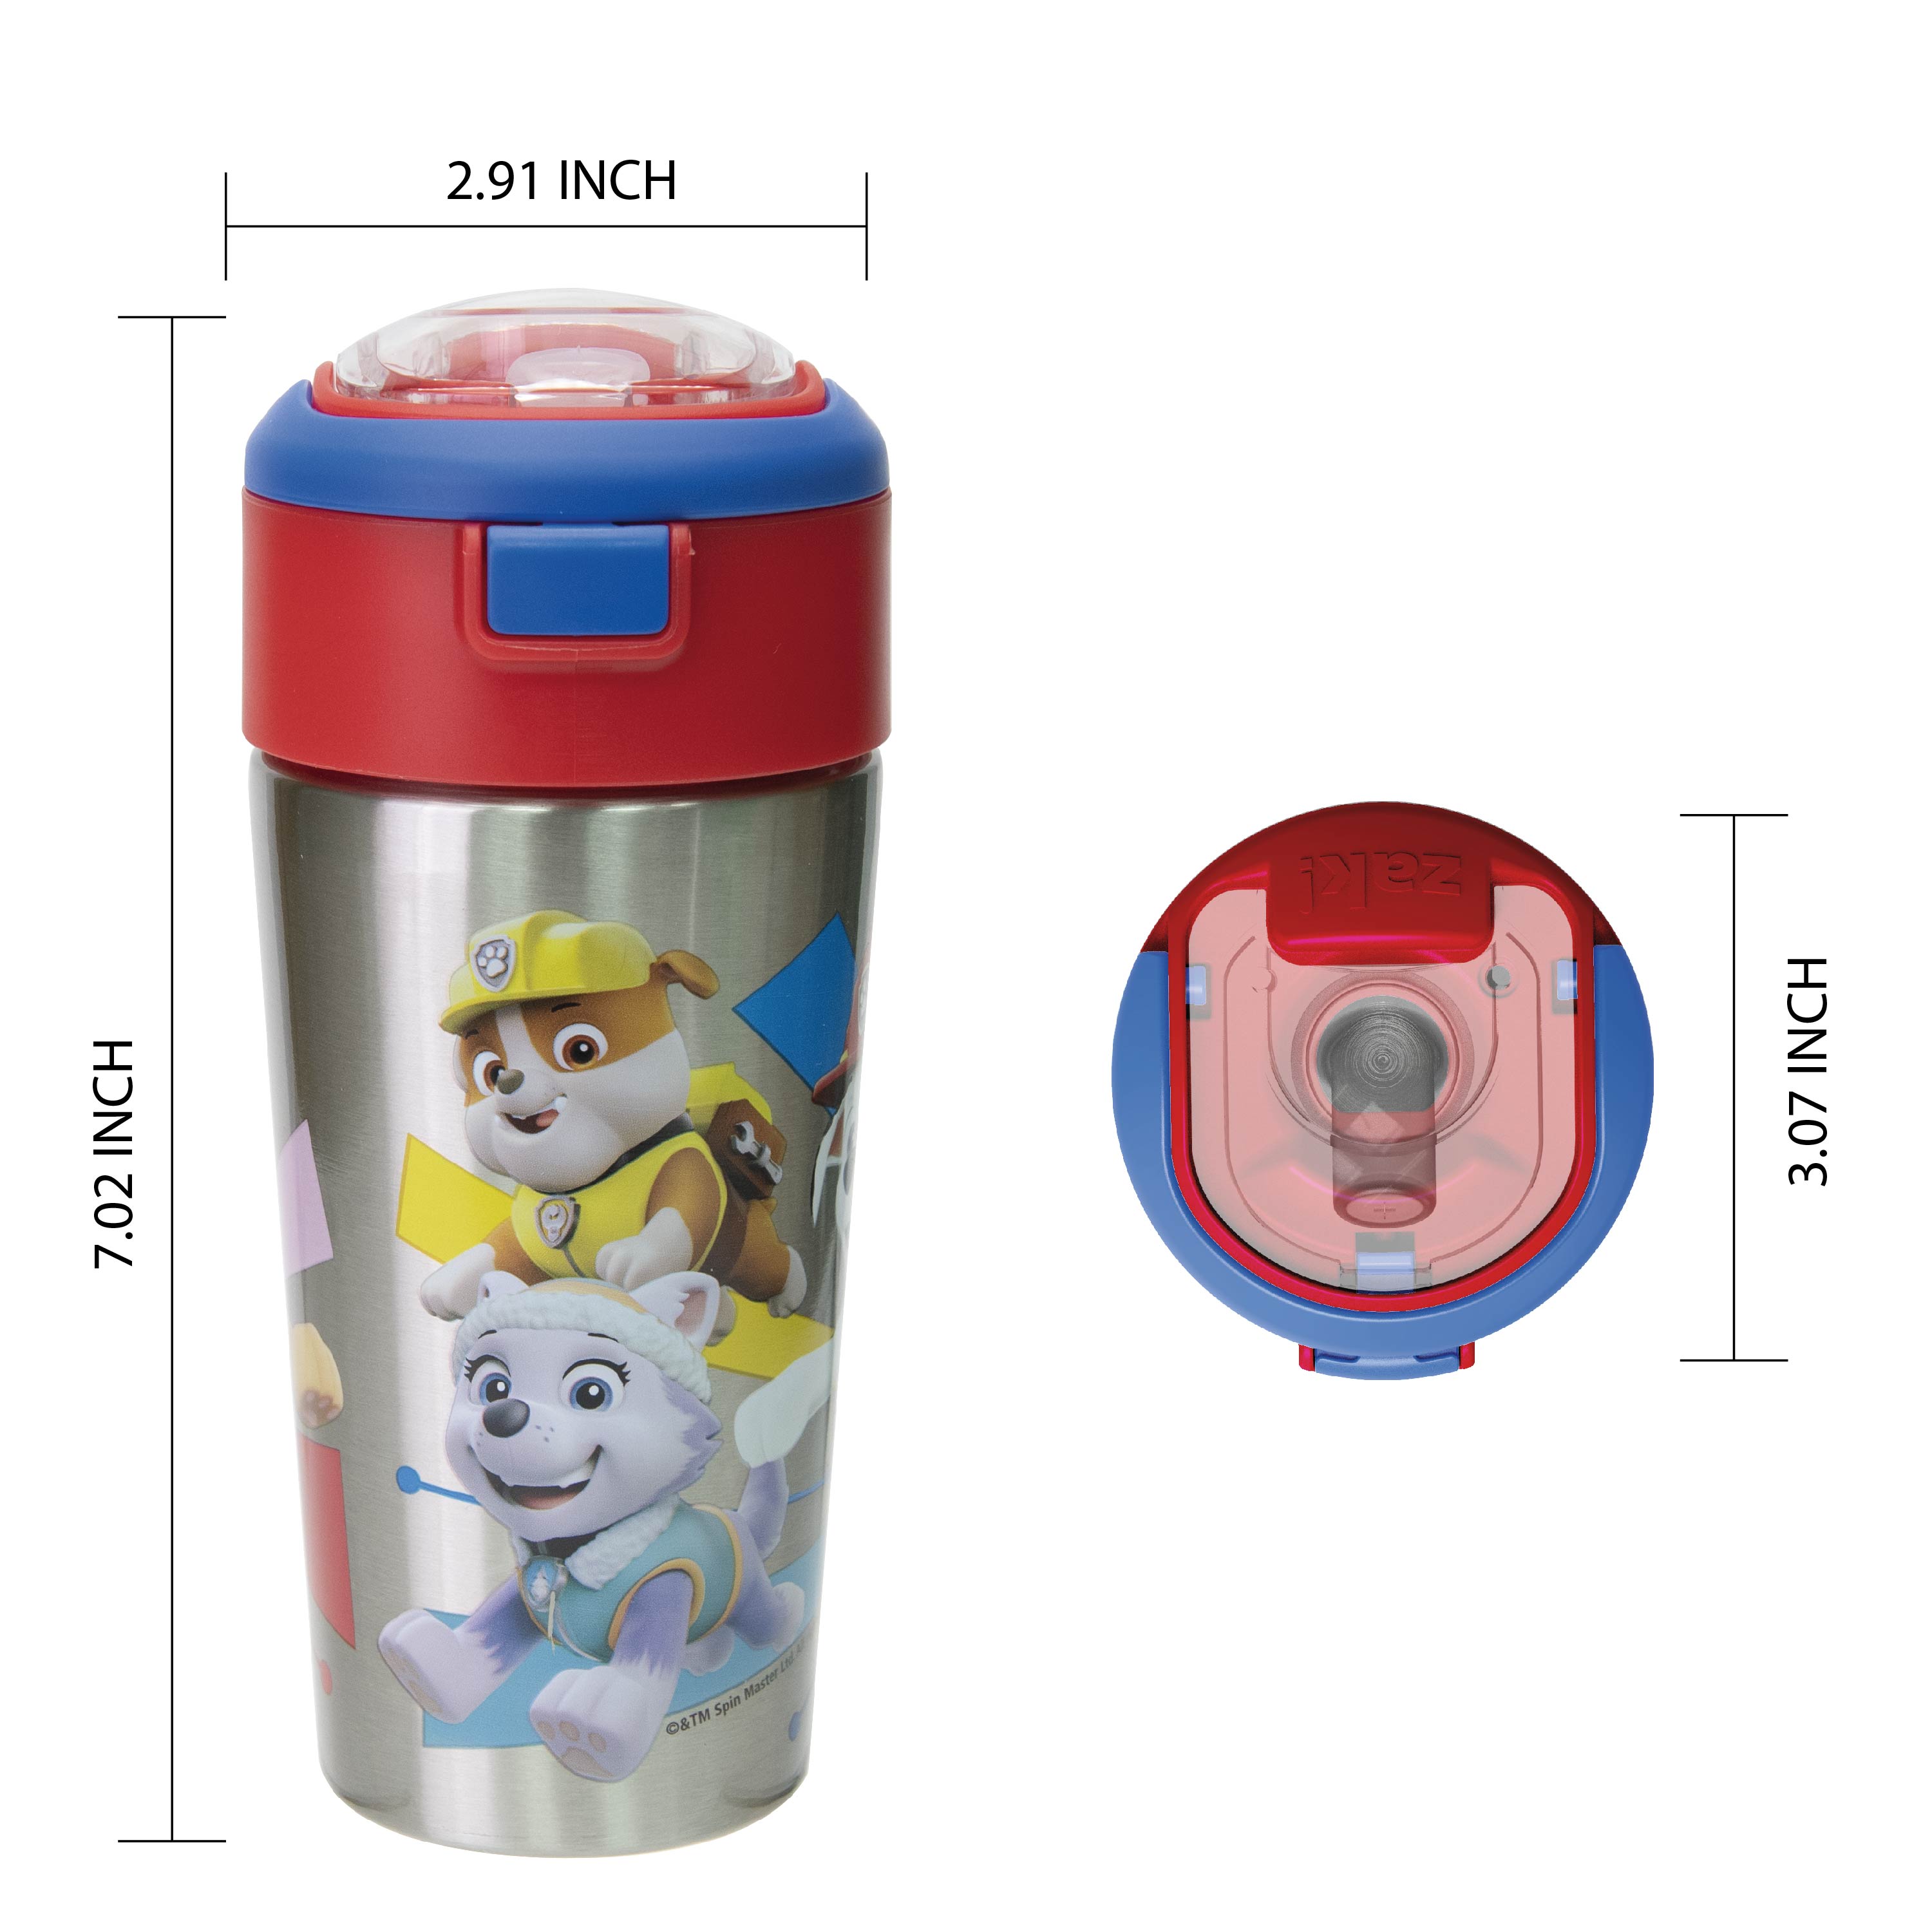 Paw Patrol 12 ounce Vacuum Insulated Reusable Stainless Steel Water Bottle, Skye, Rubble & Friends slideshow image 4